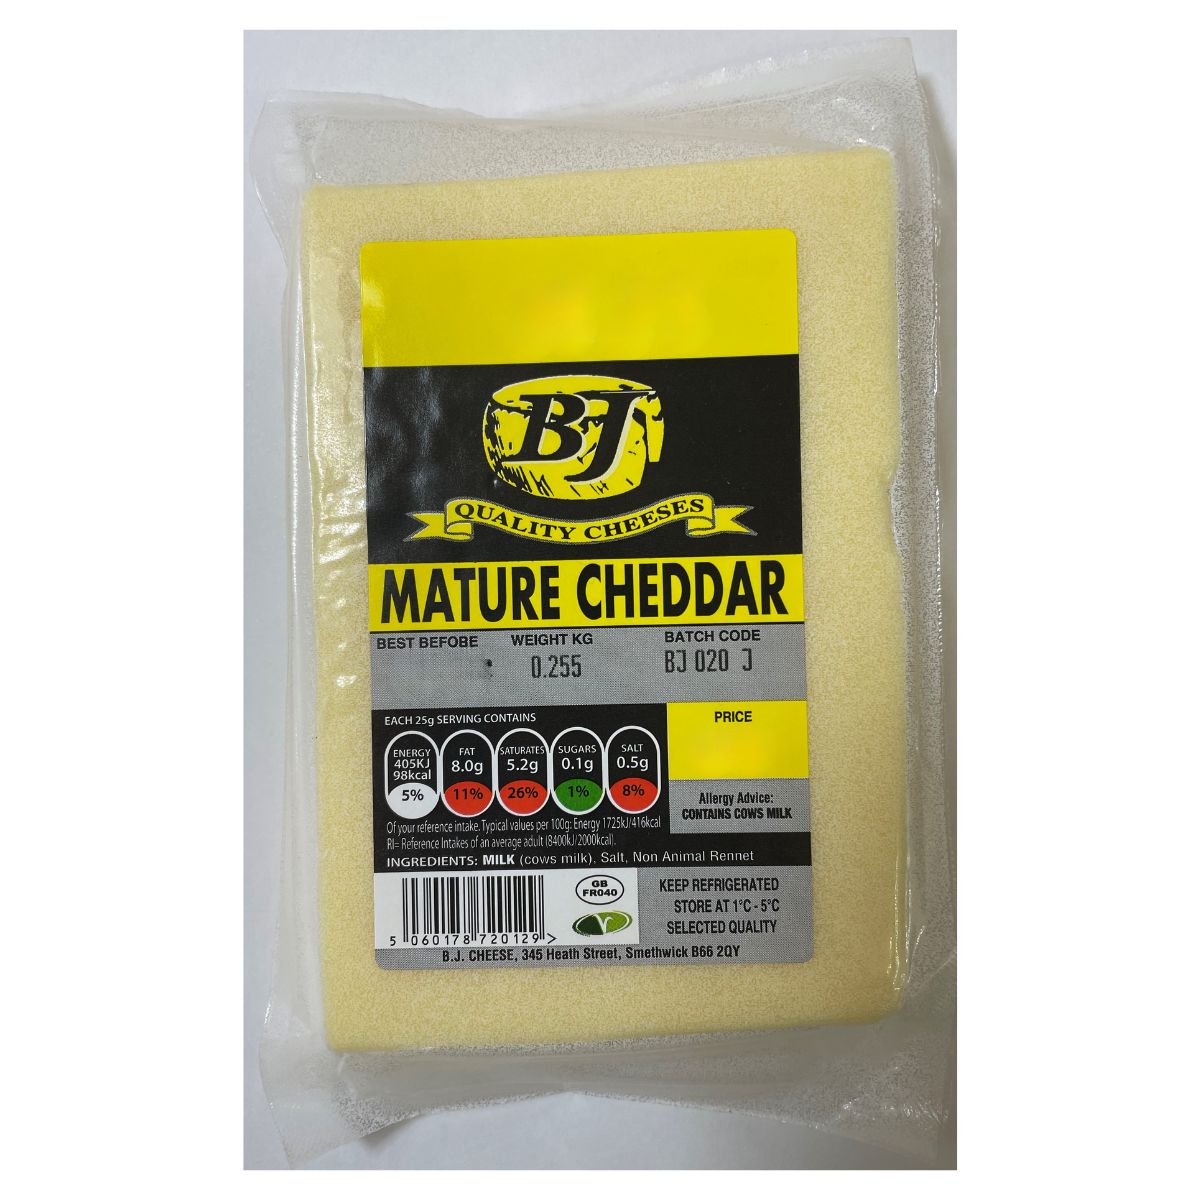 A package of Bj - Mature Cheddar - 255g cheese in a package.